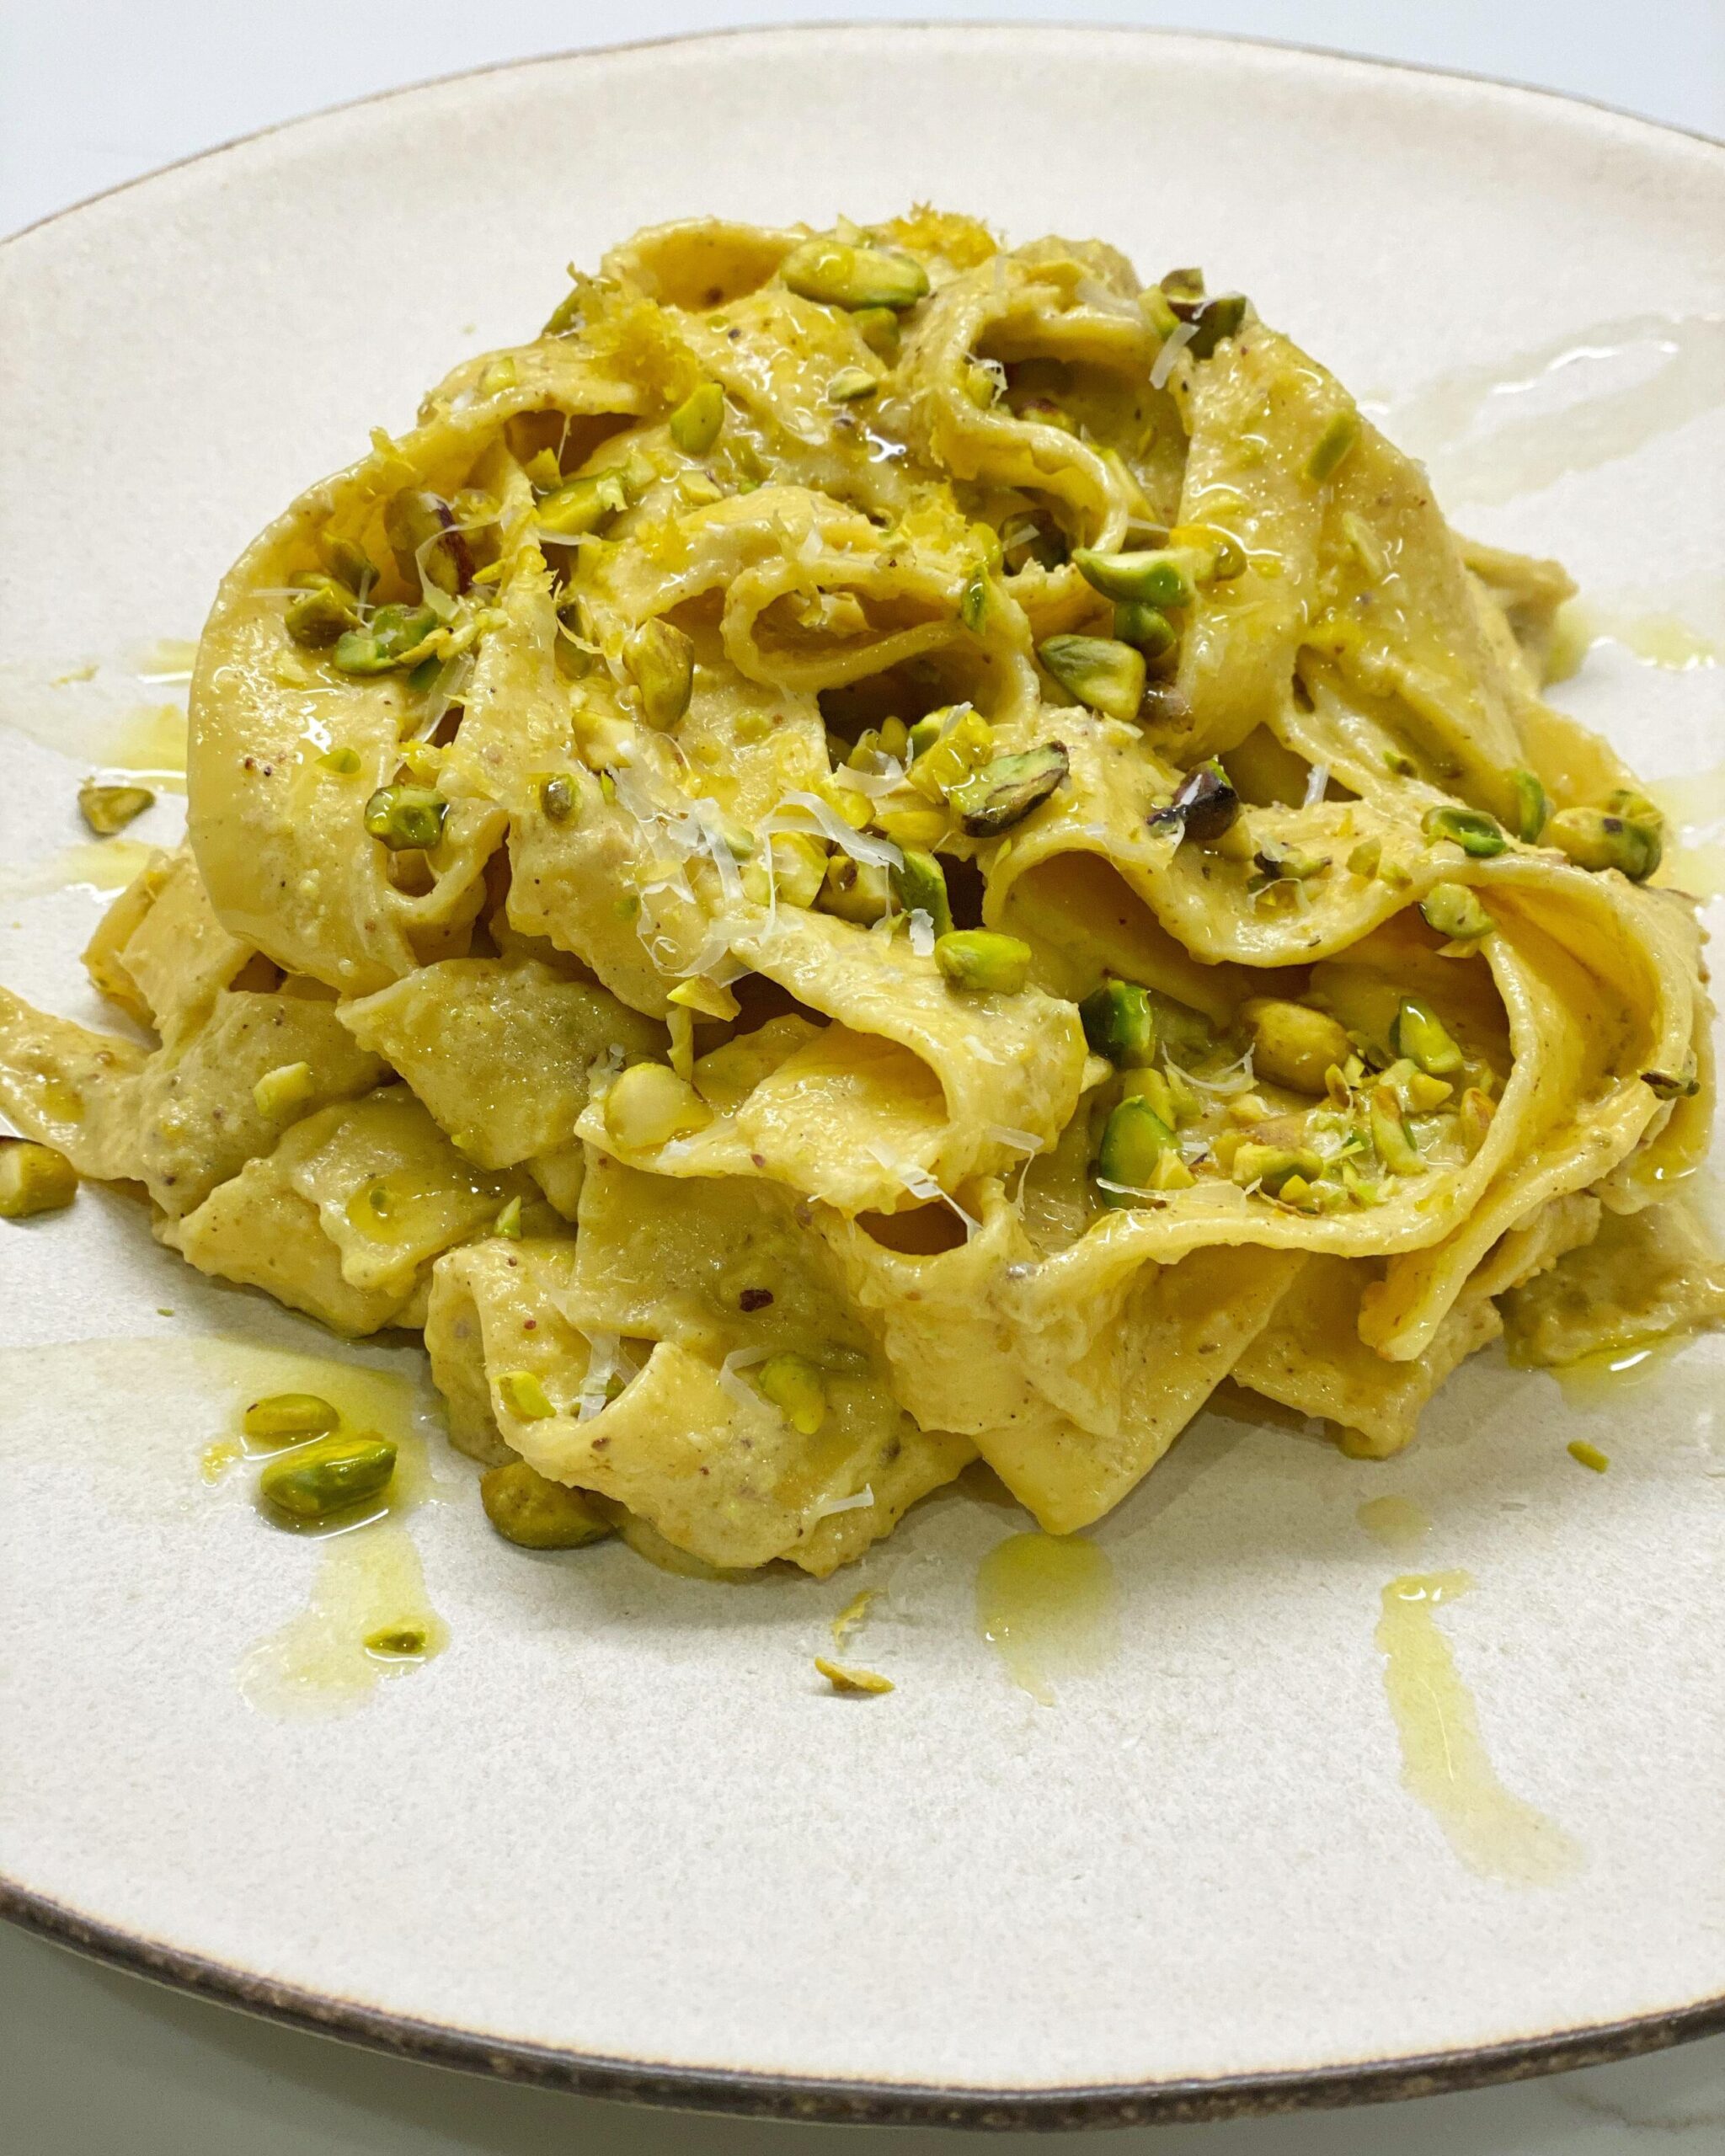  Take your taste buds on a trip to the Middle East with the flavors of creamy pistachio sauce.